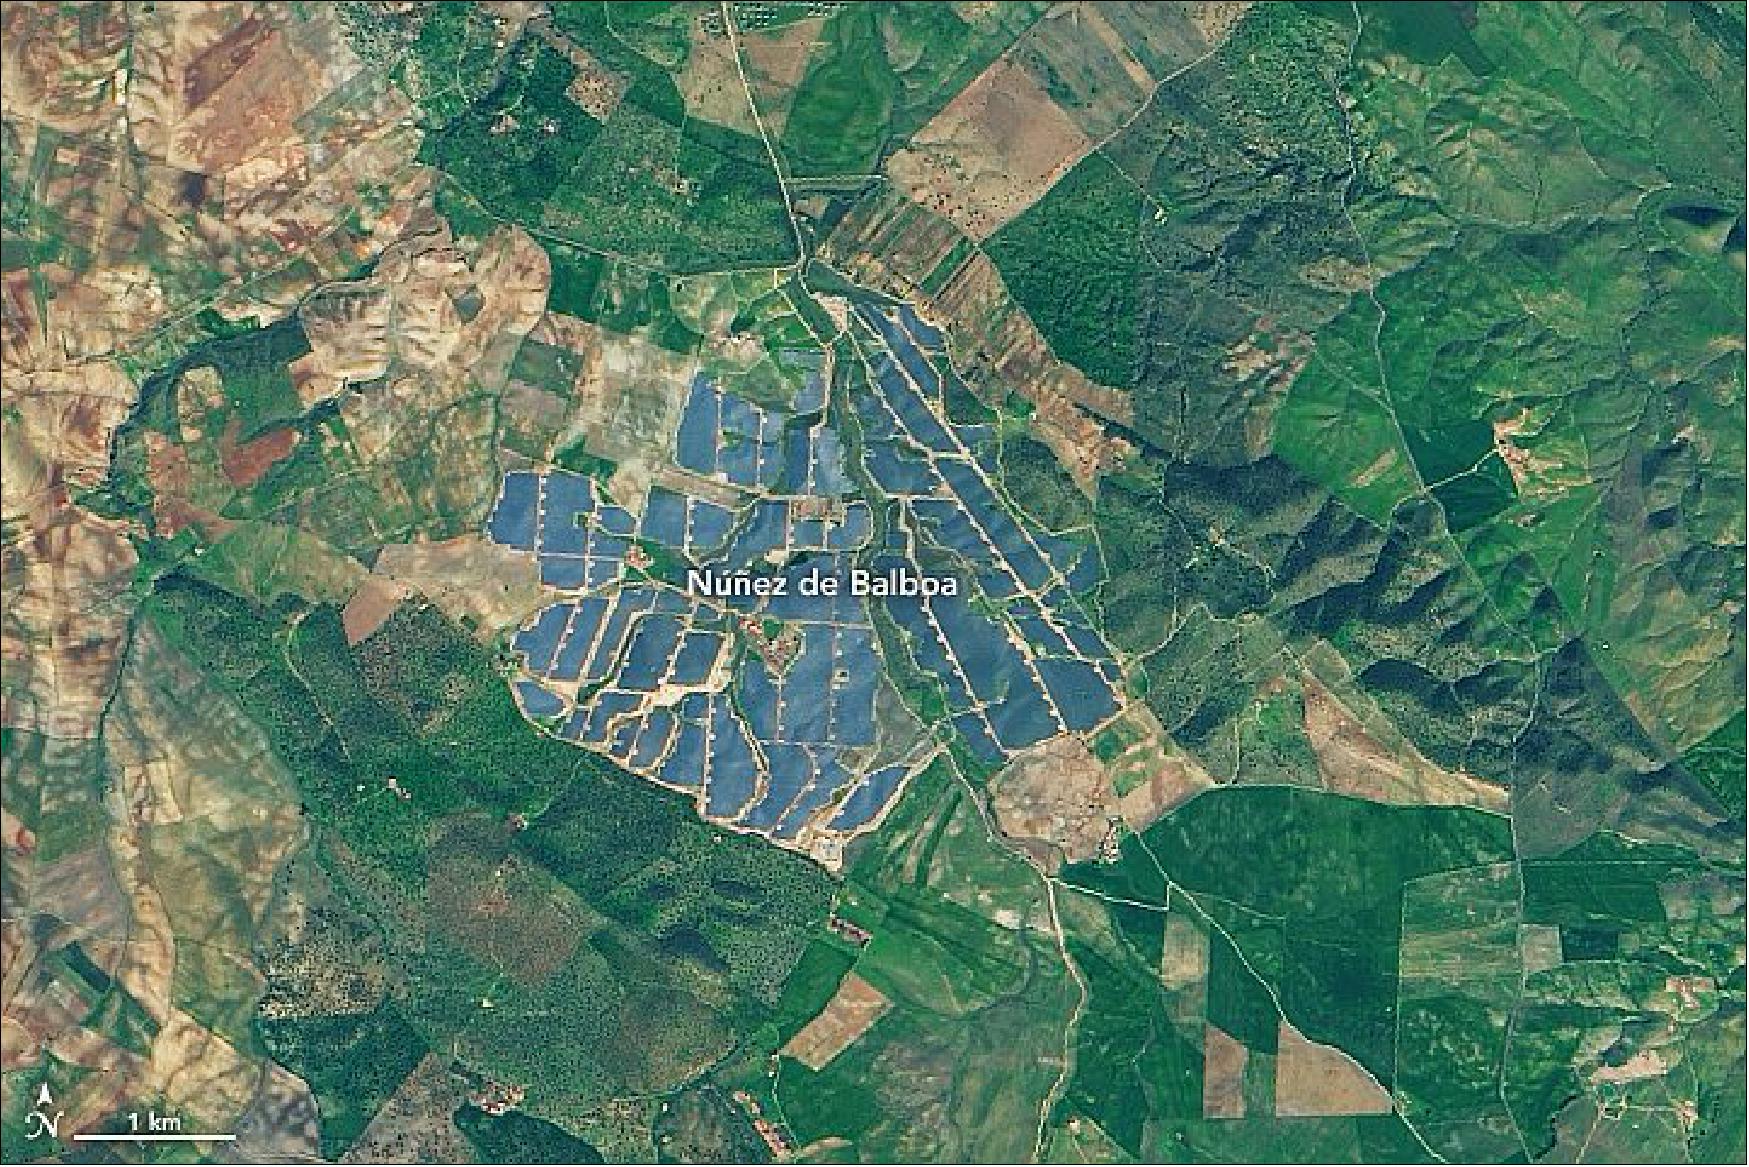 Figure 113: This image shows the Núñez de Balboa photovoltaic plant, located in the town of Usagre in the western Spanish region of Extremadura. The image was acquired with OLI on Landsat-8 on 2 February 2020. The solar panels cover an area of nearly 10 km2 with a mass of than 12,000 tons (image credit: NASA Earth Observatory, image by Lauren Dauphin, using Landsat data from the U.S. Geological Survey. Story by Kasha Patel)